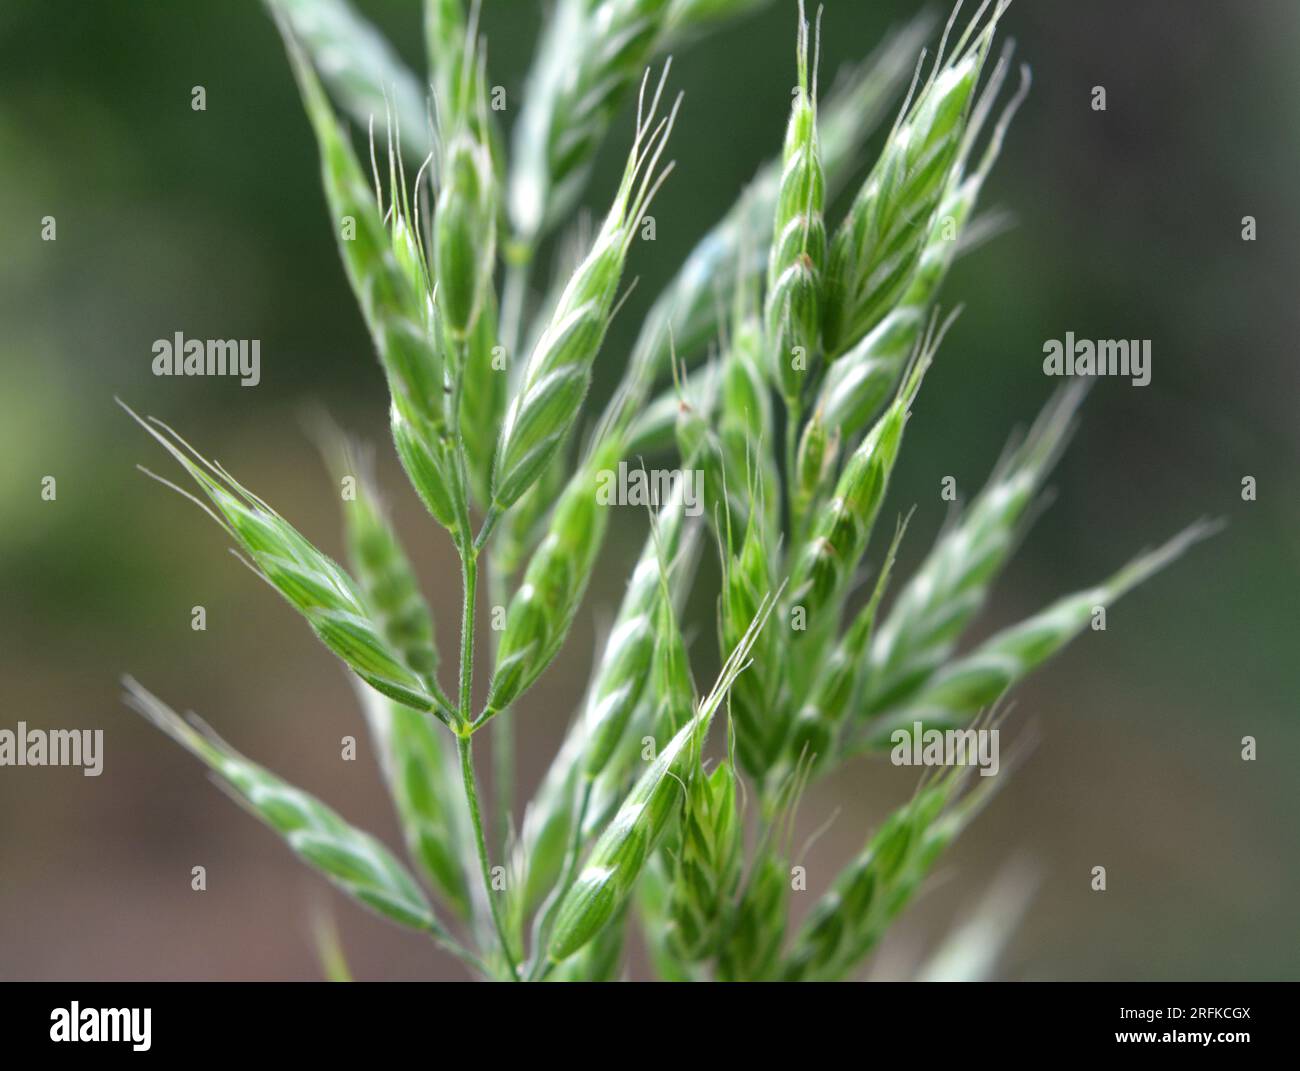 Cereal grass bromus grows in the wild Stock Photo